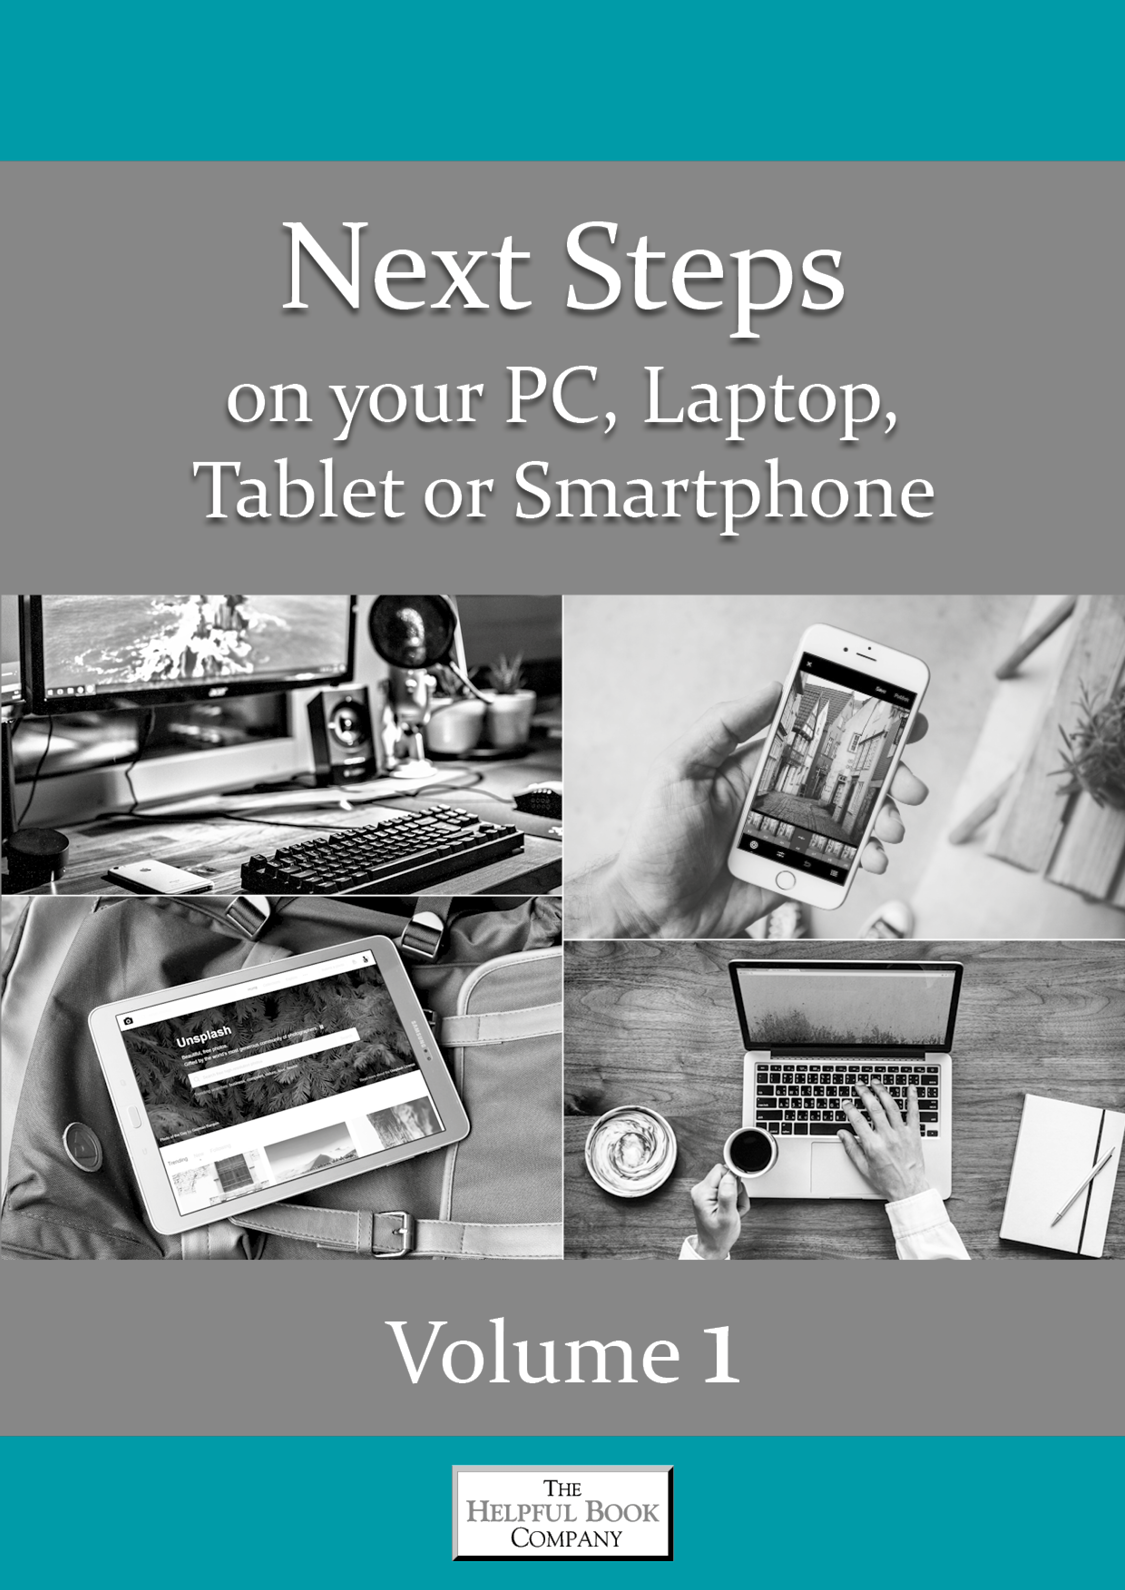 Next Steps in using your PC, Laptop, Tablet or Smartphone Volume one